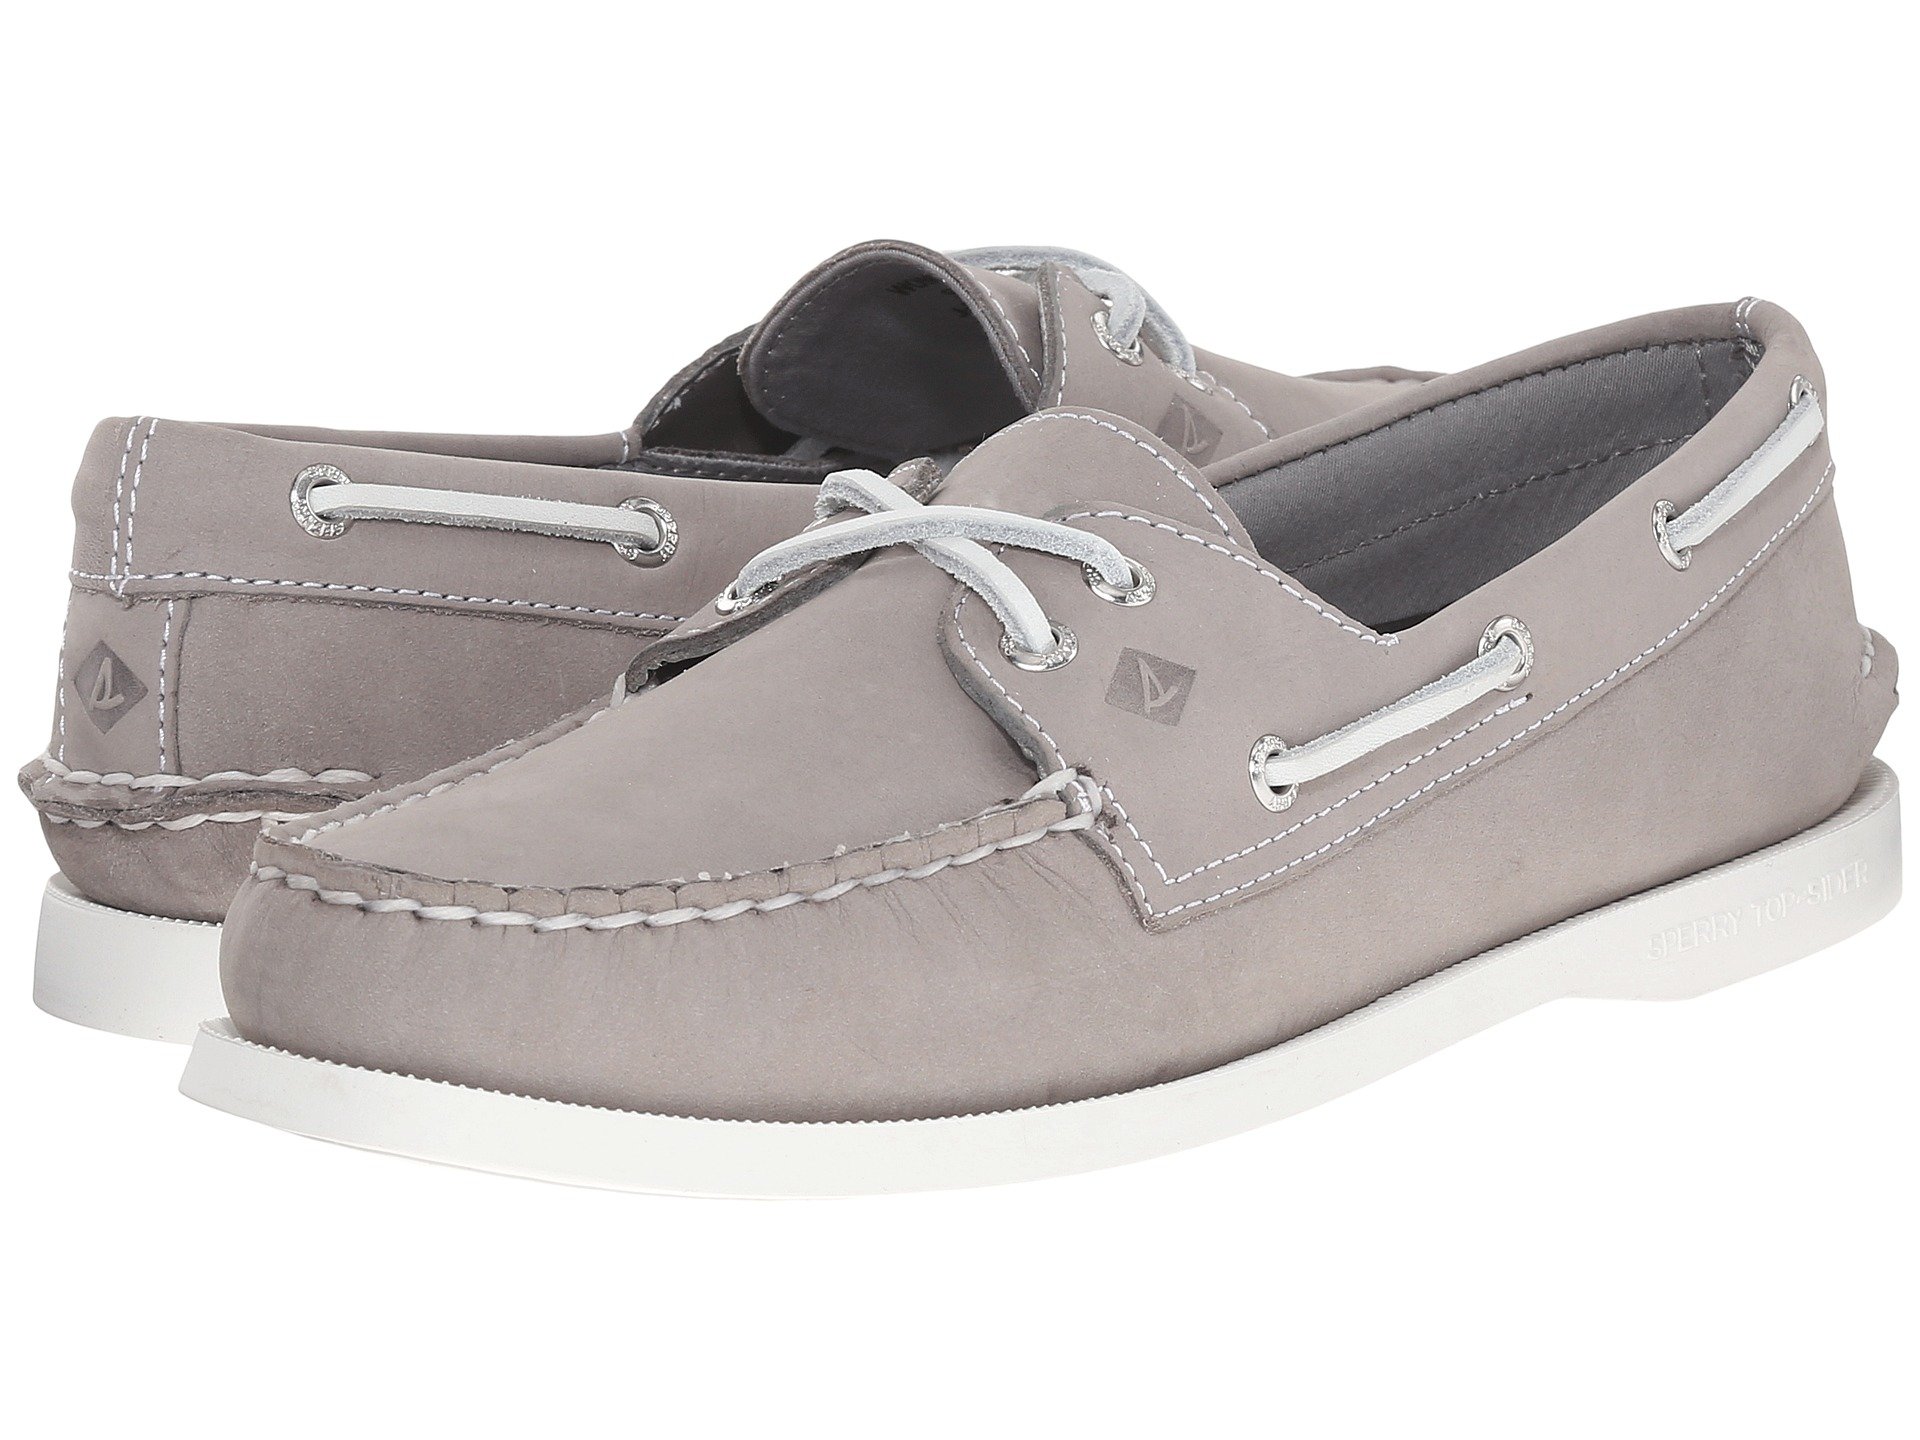 Lyst - Sperry Top-Sider A/o 2-eye Leather in Gray